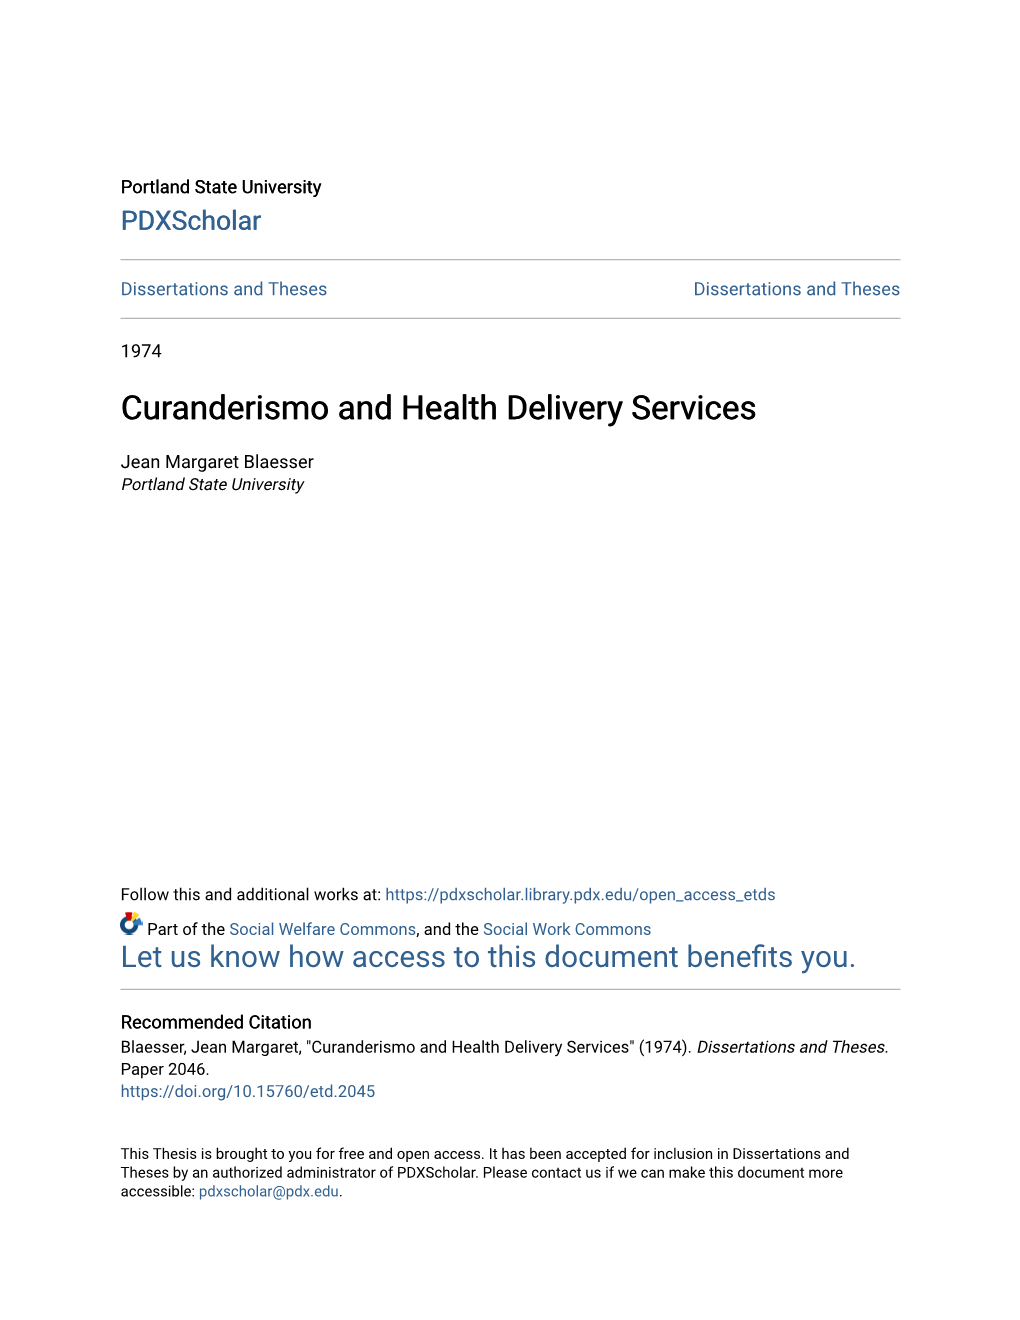 Curanderismo and Health Delivery Services